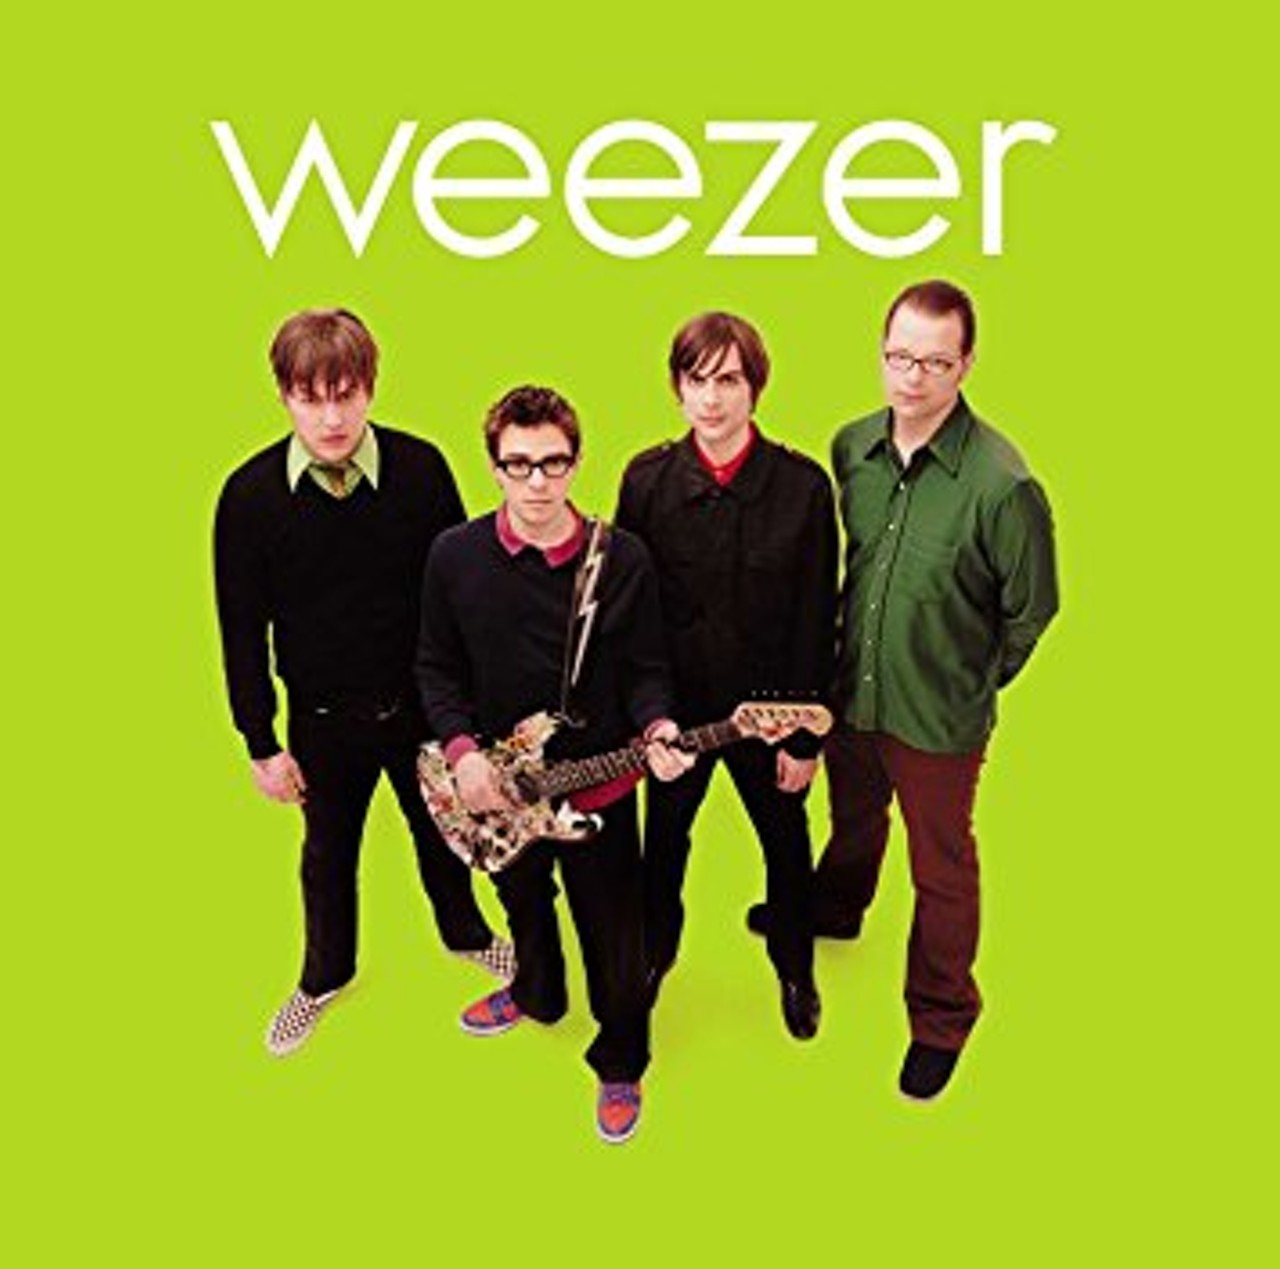 Weezer/Pixies/The Wombats at Blossom 
Wed, July 11
Album Cover Art